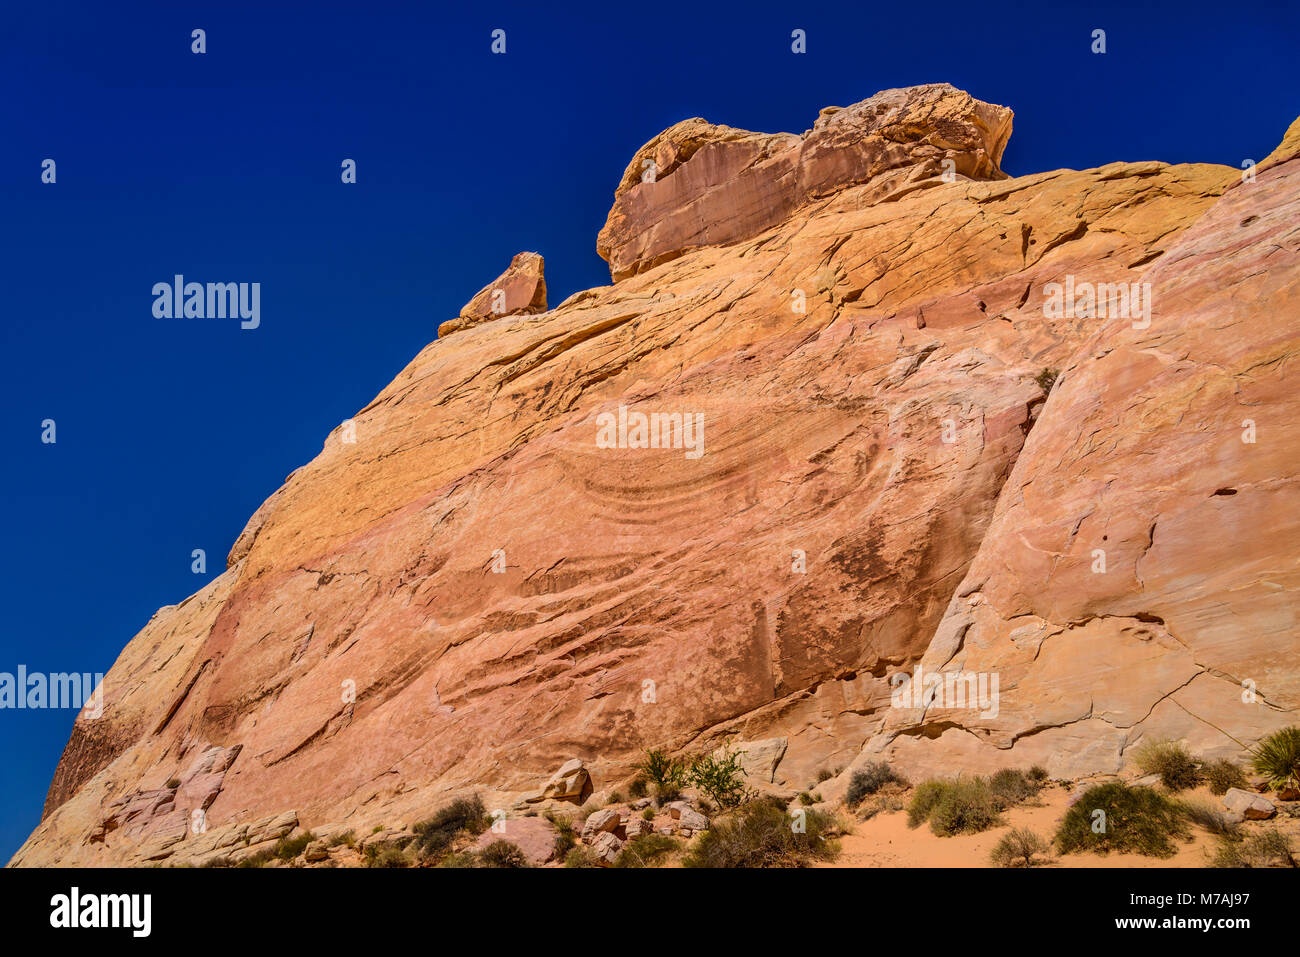 The USA, Nevada, Clark County, Overton, Valley of Fire State Park, White Dome Stock Photo